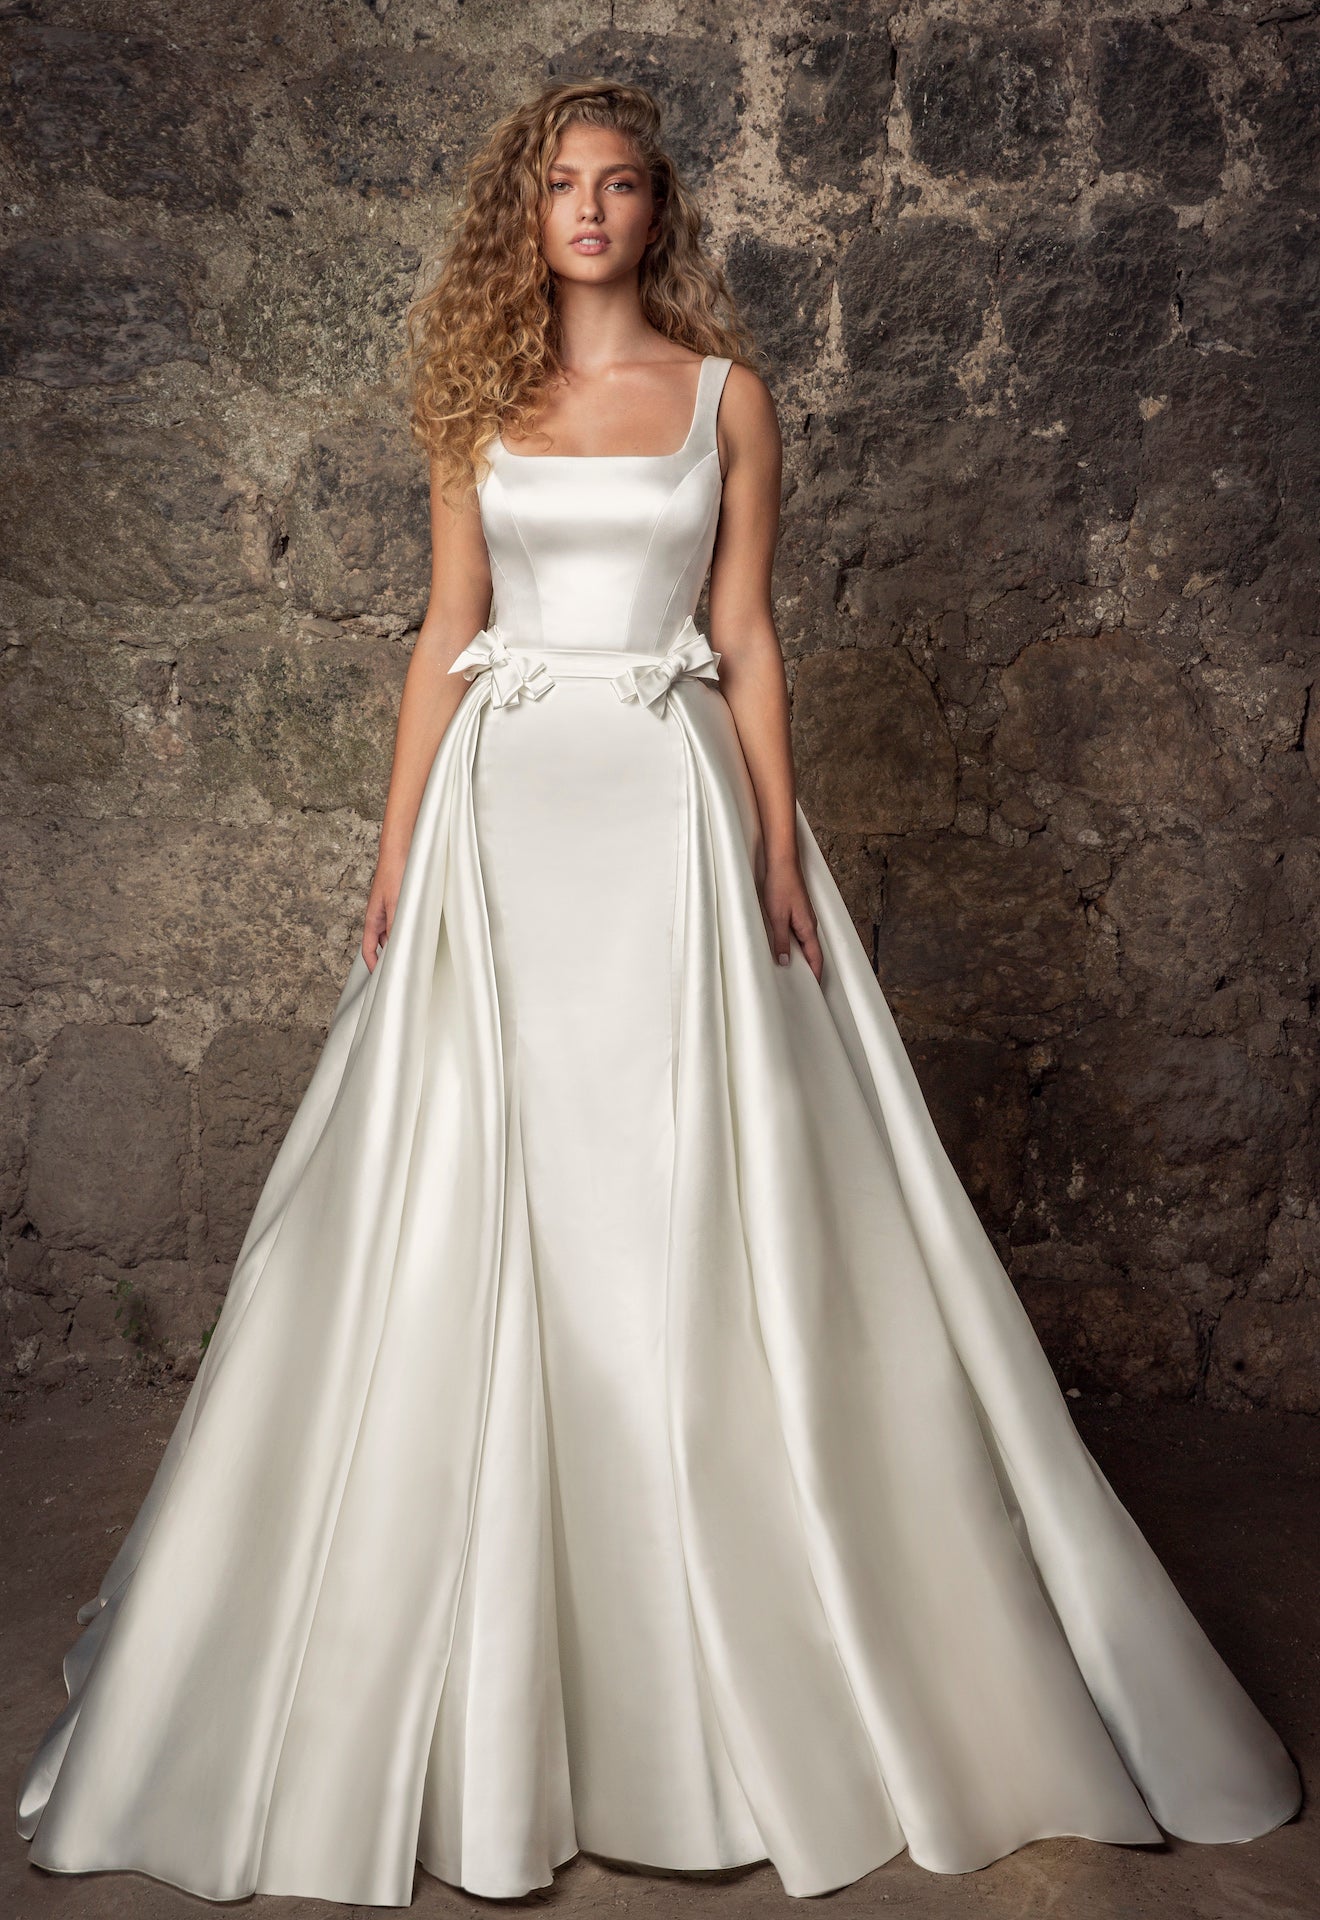 Sleeveless Satin Square Neck Mermaid Wedding Dress With Pearl Belt And  Overskirt